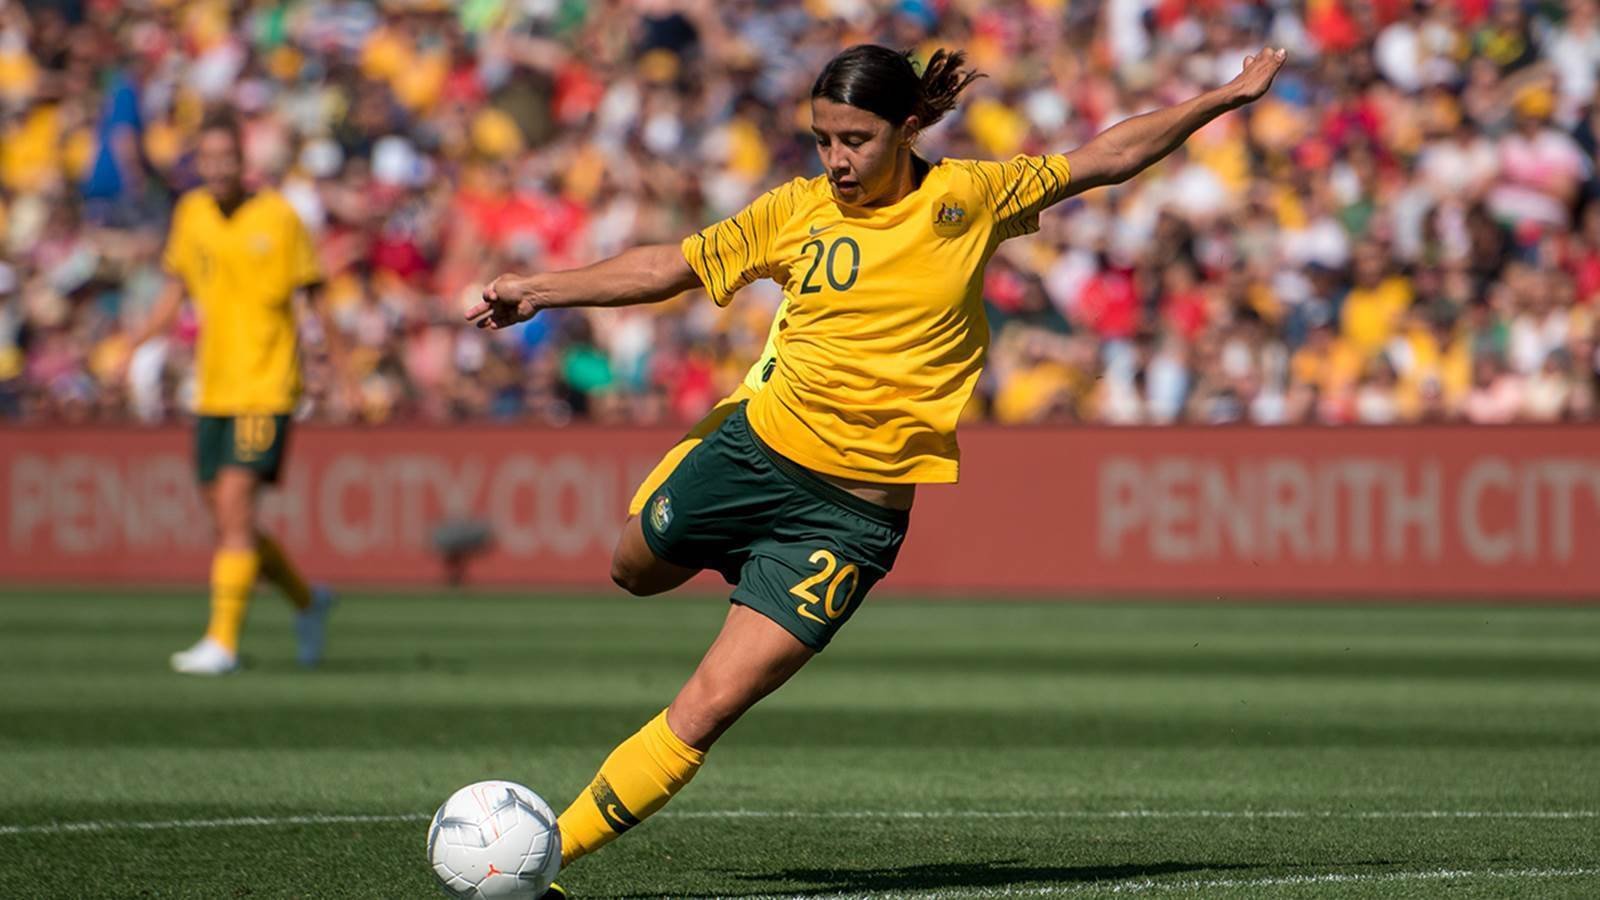 Sam Kerr is the most famous female soccer player UK